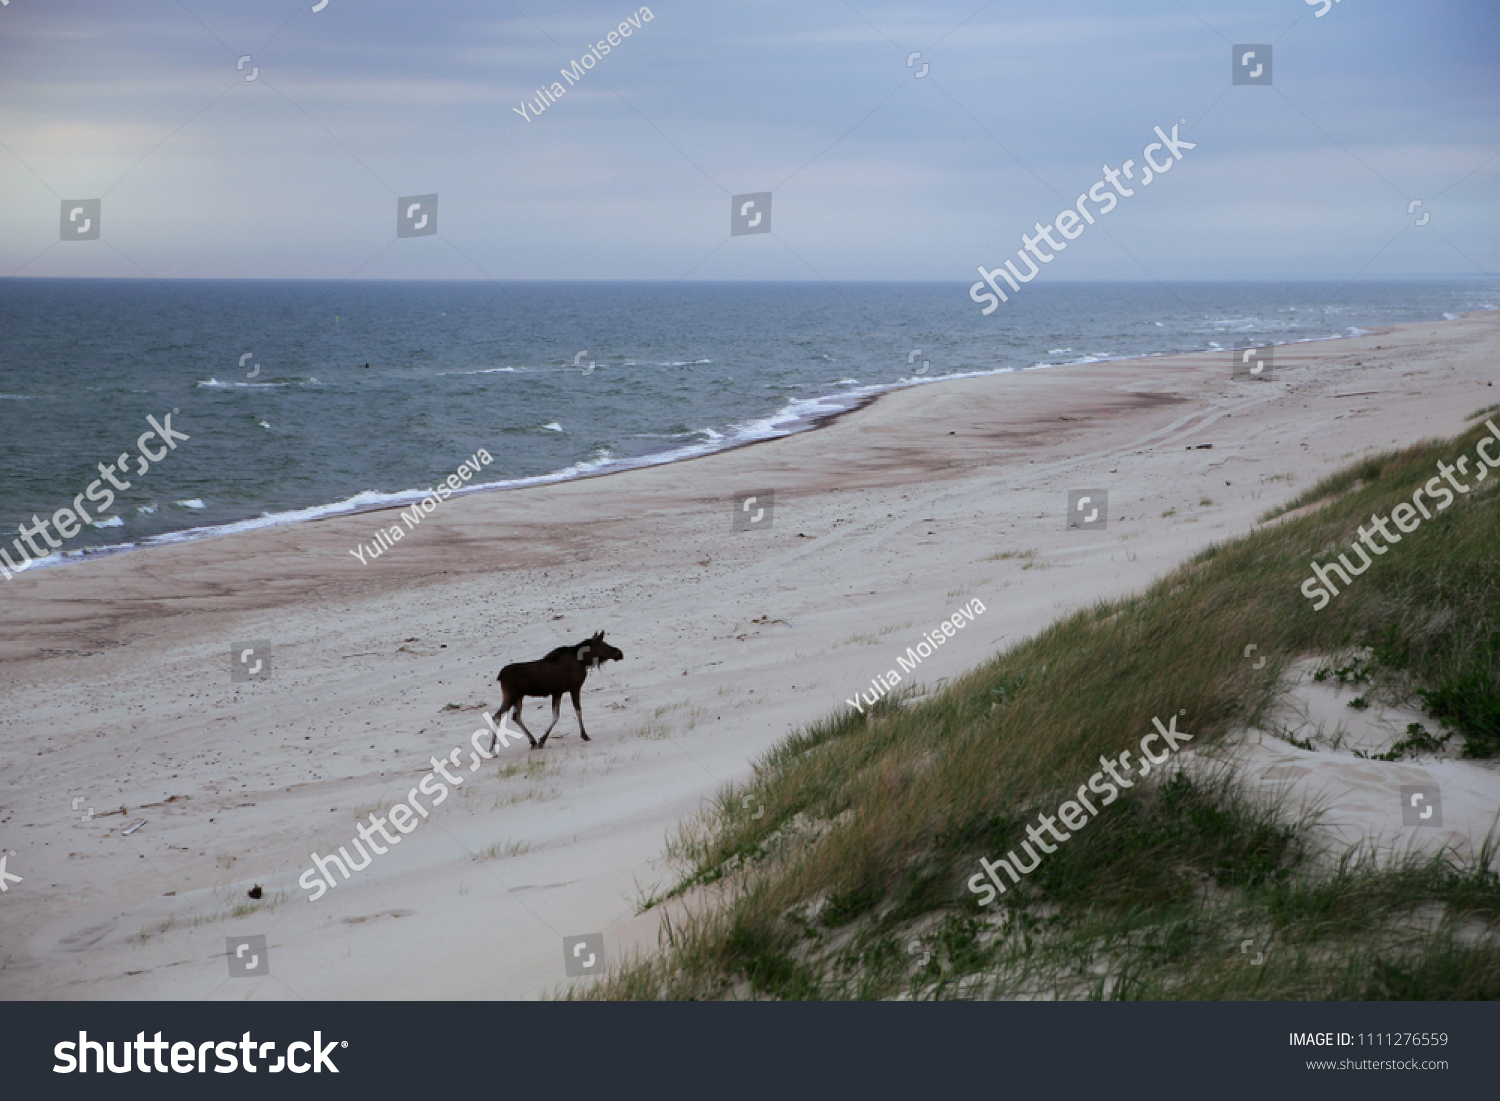 Wild moose on the beach in Nida (Lithuania, the Baltic Sea, the Curonian Spit). Rest in the north of Europe. Walk on the sand. Summer landscape. #1111276559